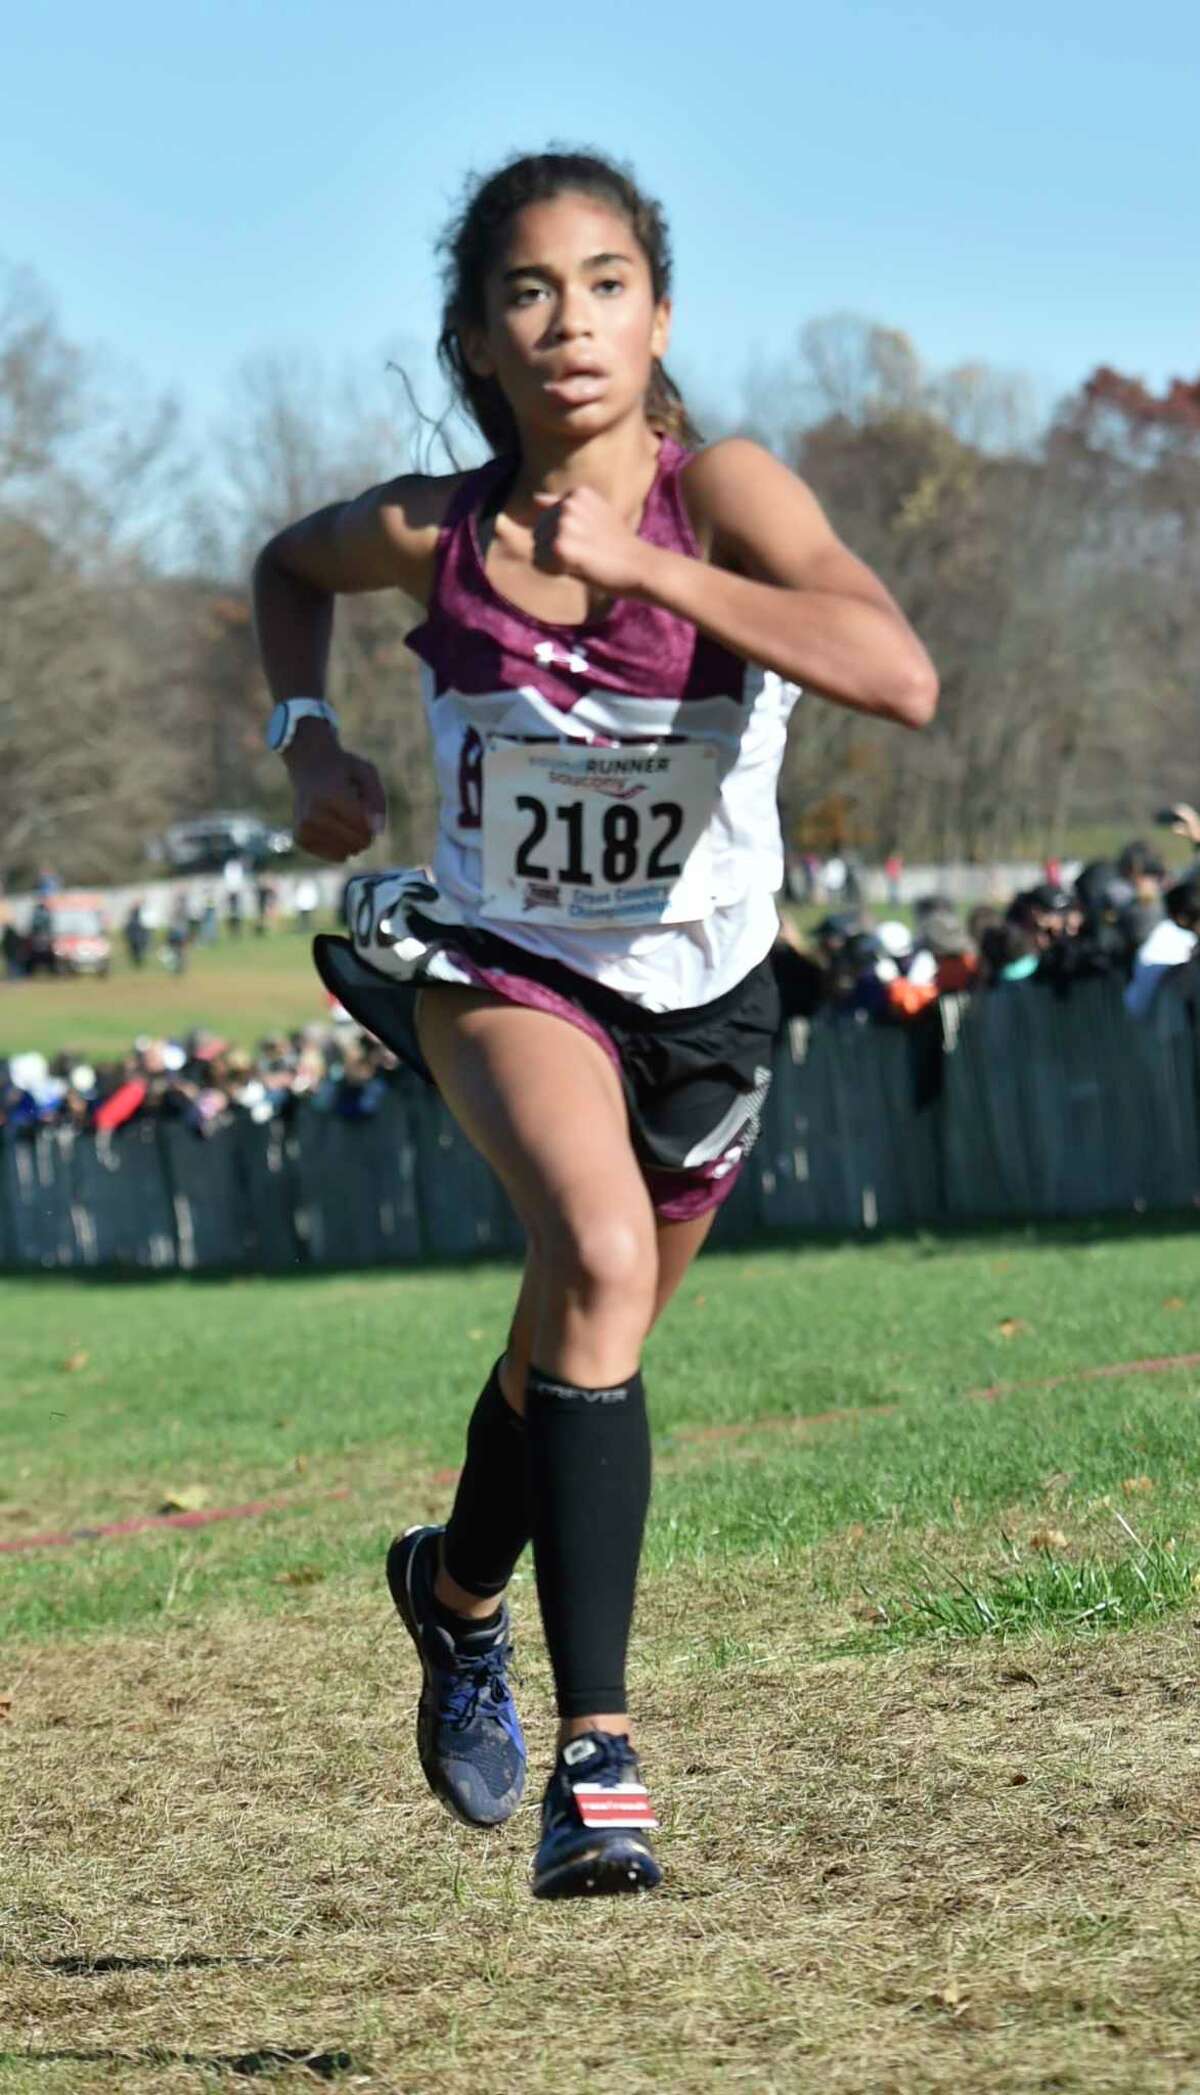 Manchester, Connecticut -Wednesday, November 1, 2019: The CIAC Girls Cross Country Open Championship Friday at Wickham Park in Manchester. 4th place finisher Ava Graham of Bethel H.S.